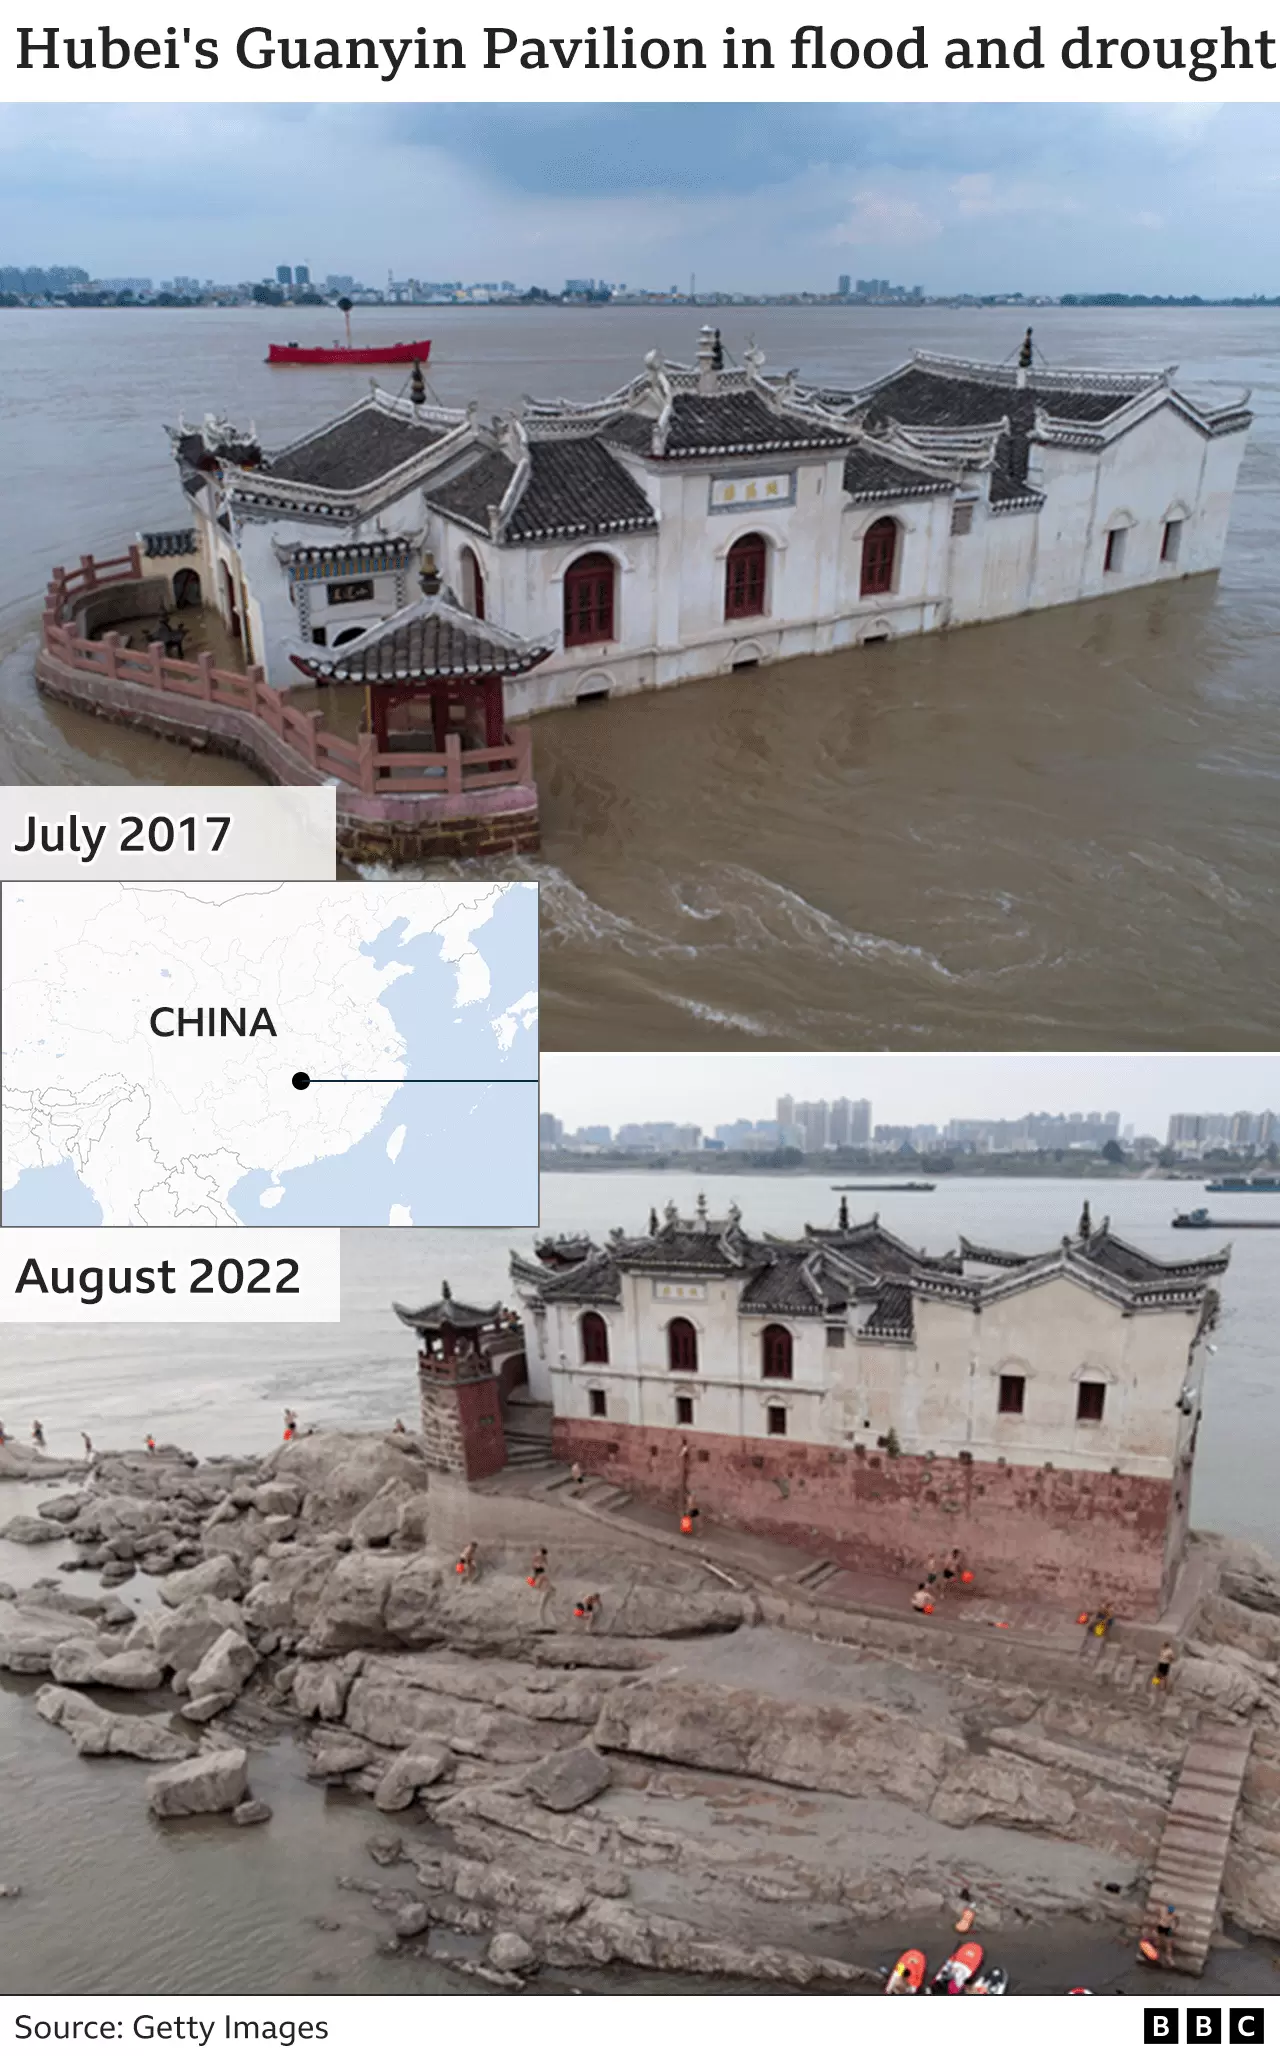 Hubei’s Guanyin Pavilion during the July 2017 flood and the August 2022 drought. Photo: Getty Images